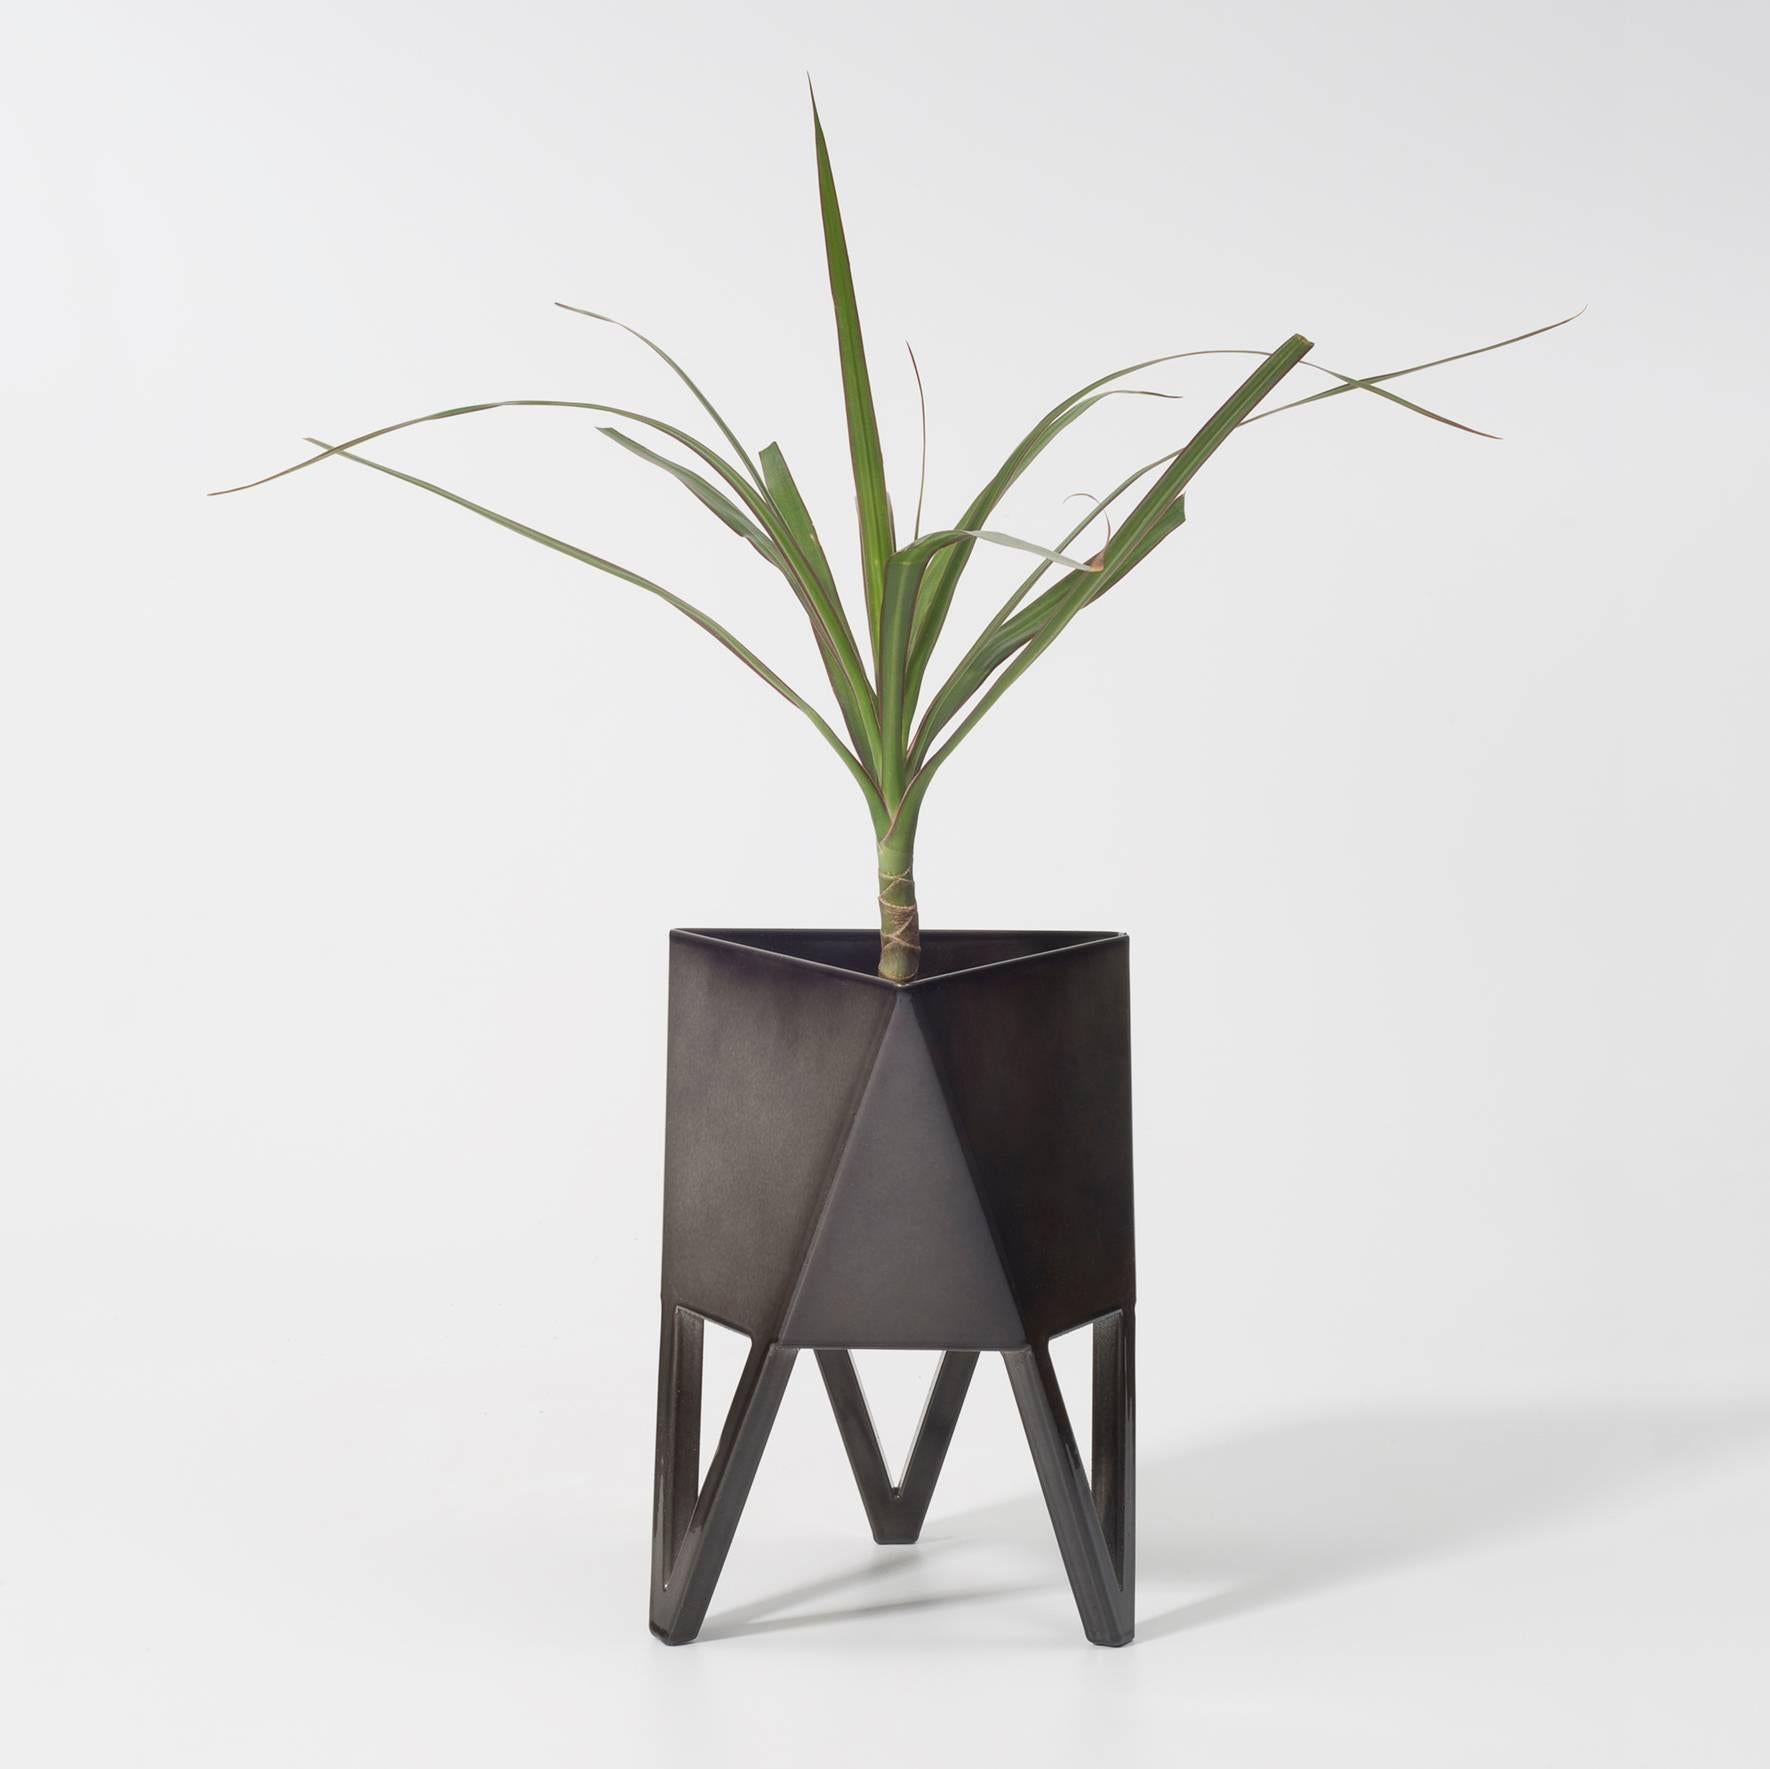 Deca Planter in Light Pink Steel, Large, by Force/Collide 5